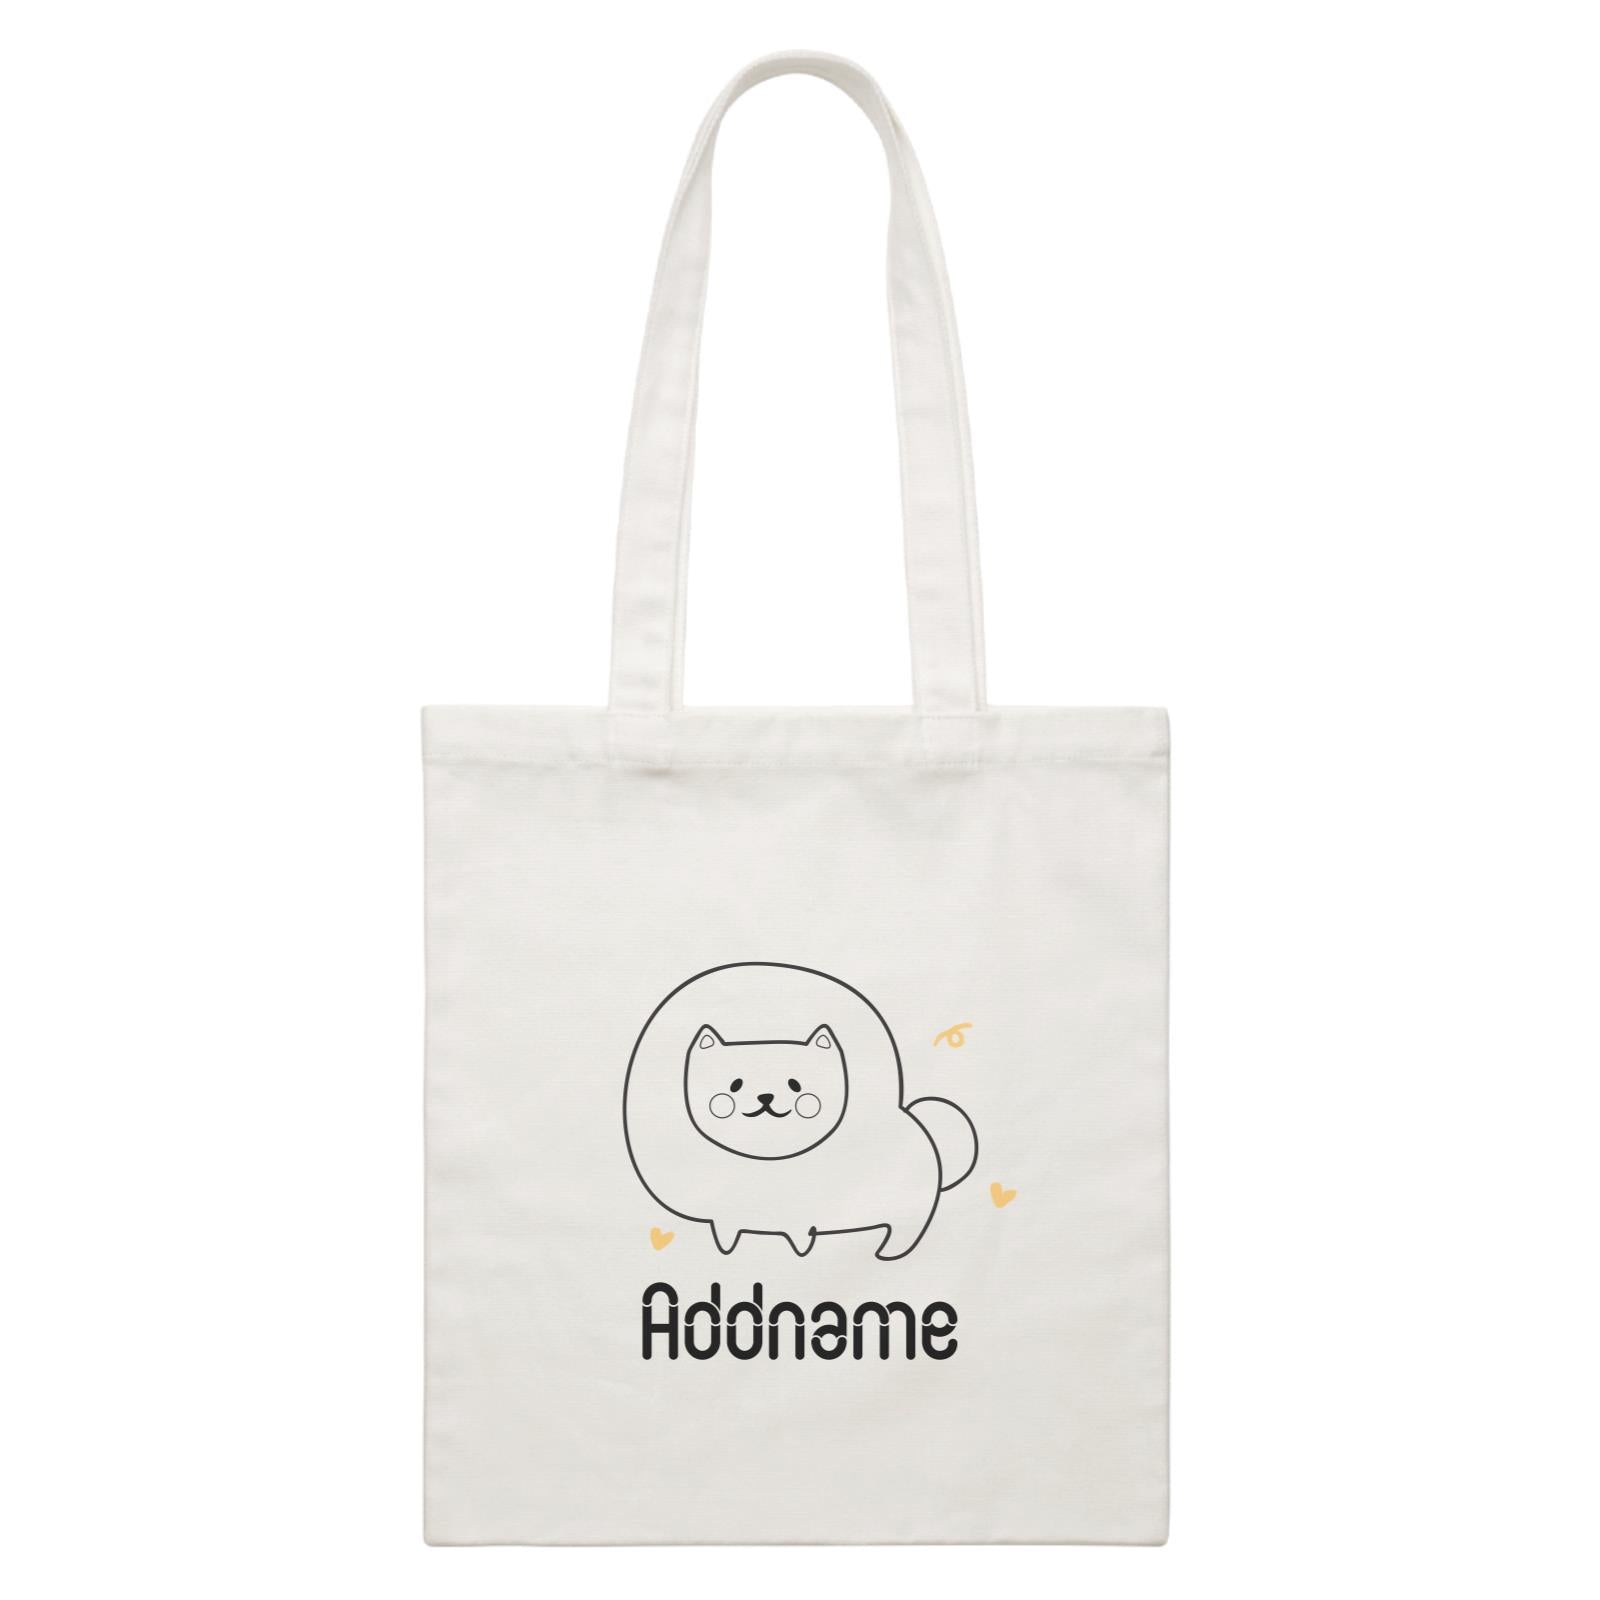 Coloring Outline Cute Hand Drawn Animals Dogs Pomeranian Addname White White Canvas Bag